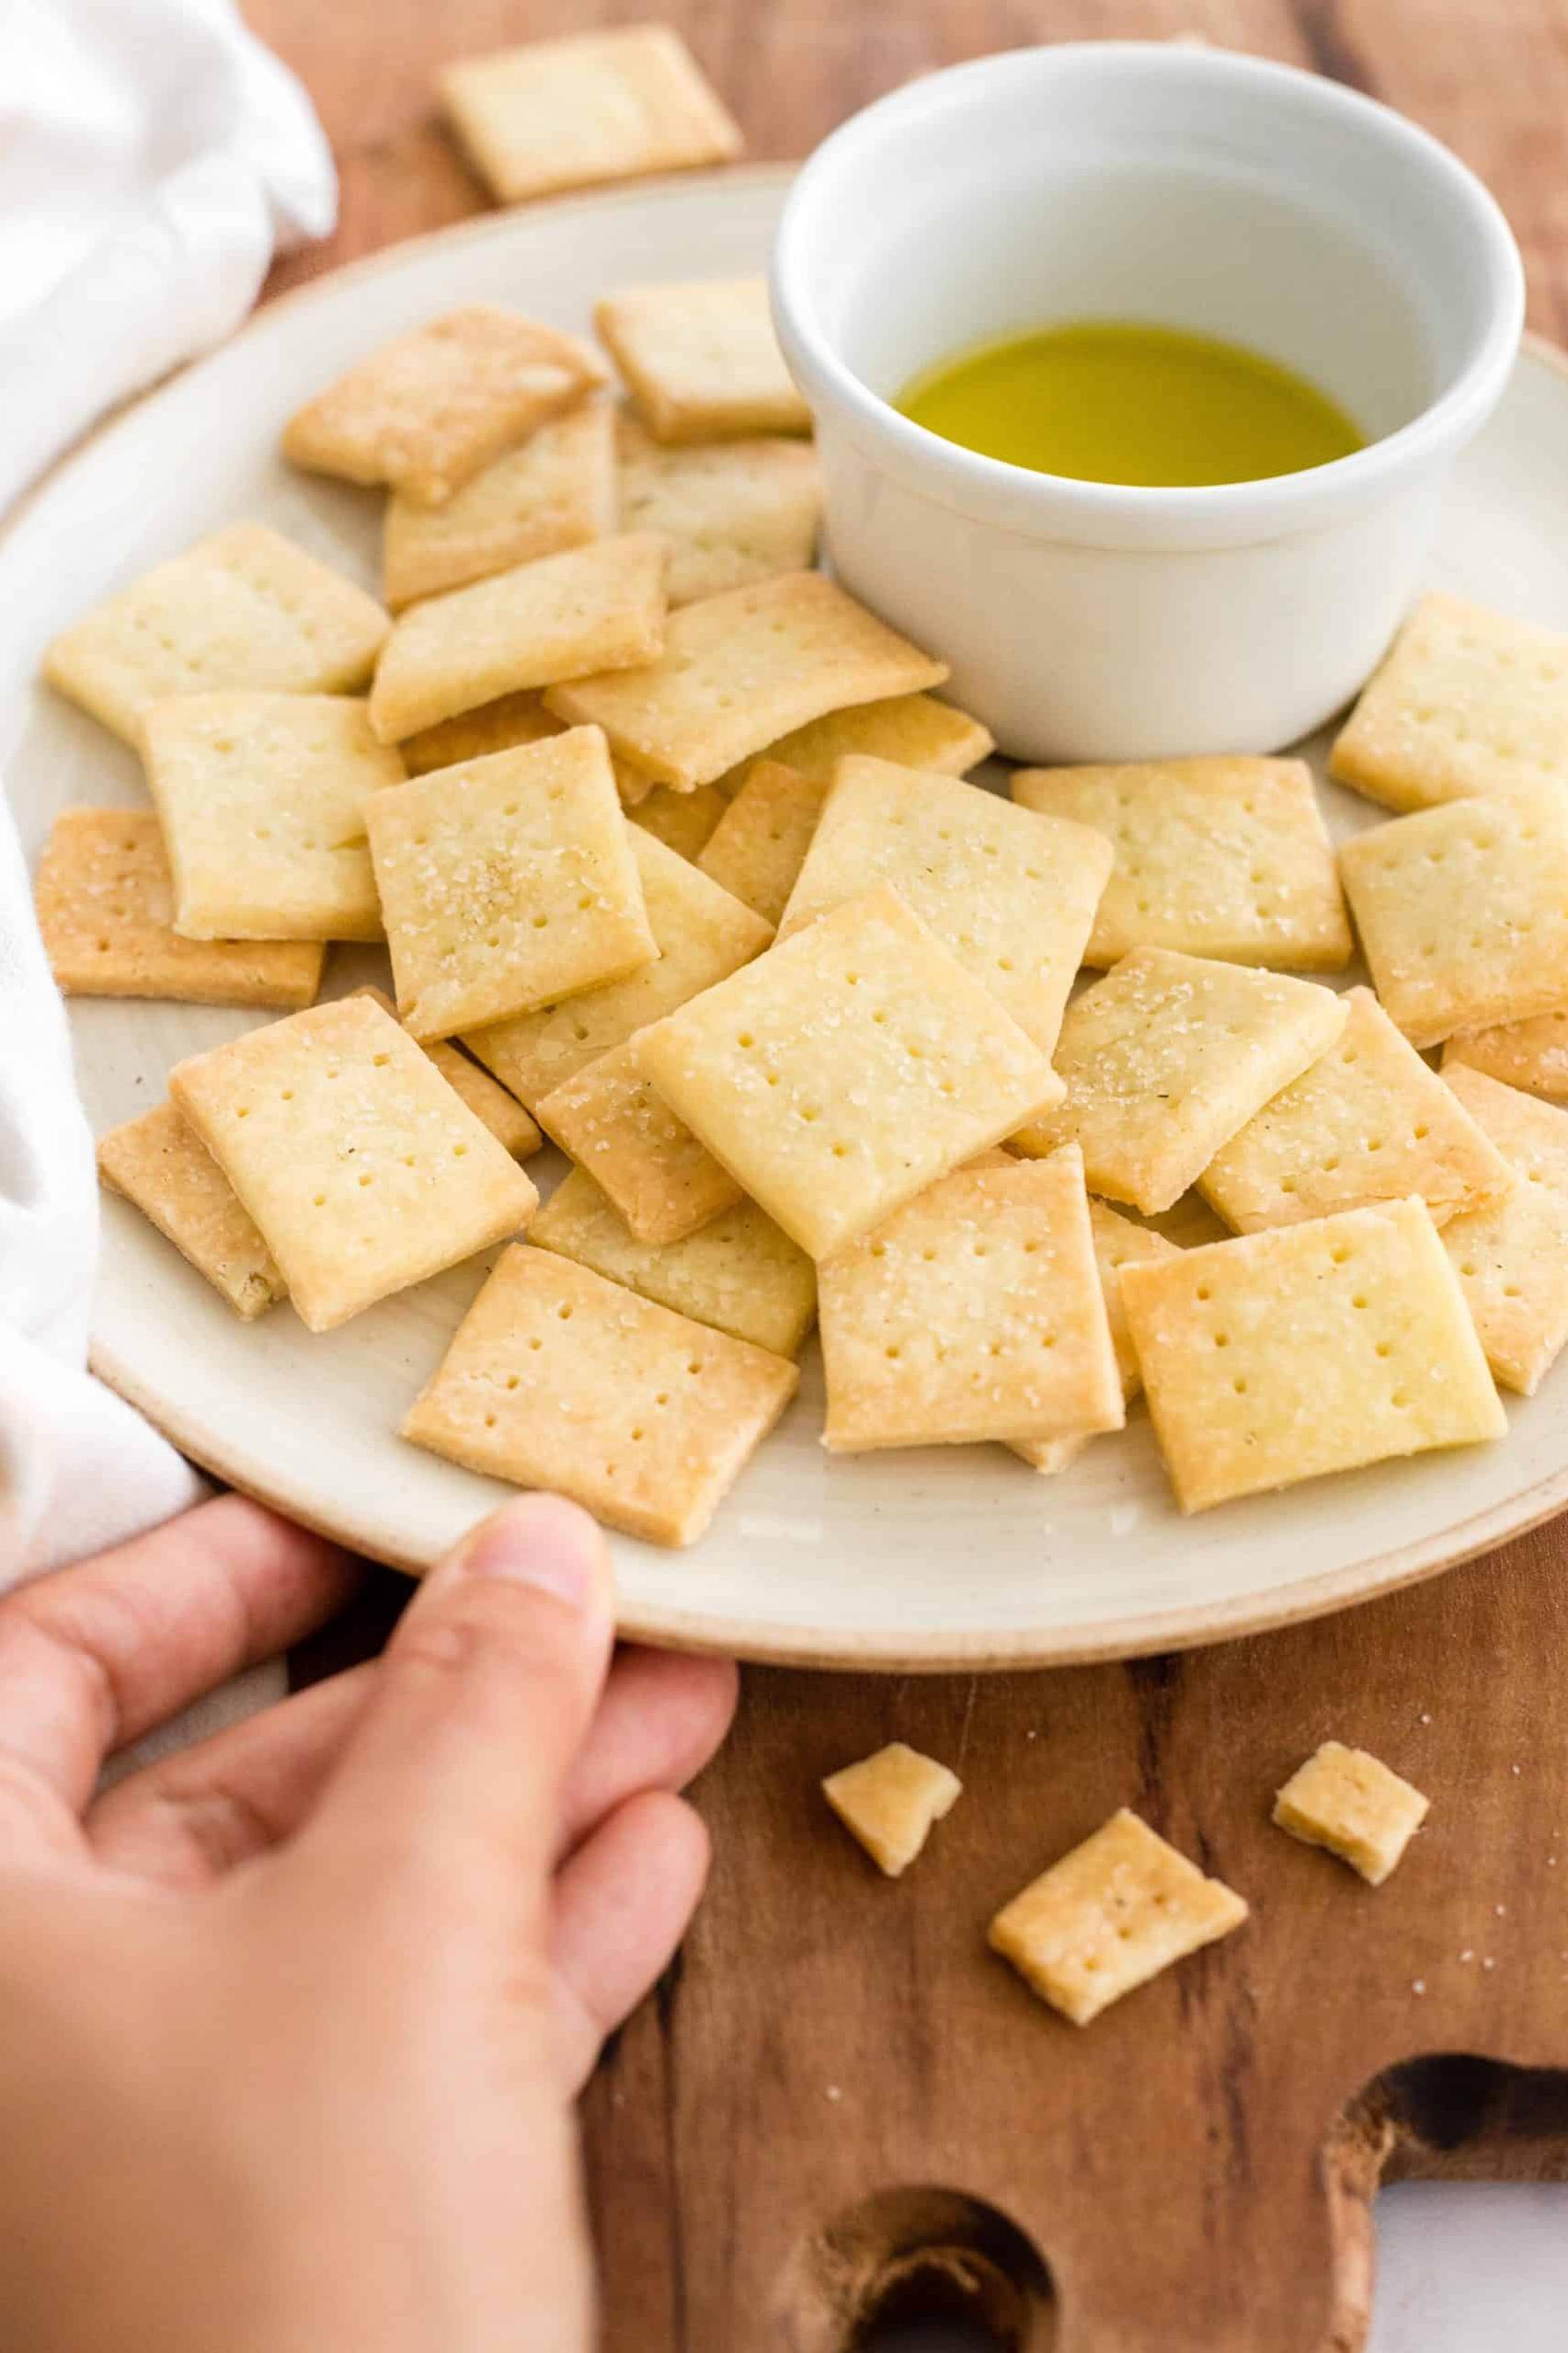  With just a few simple ingredients, you can make delicious gluten and dairy free crackers at home.